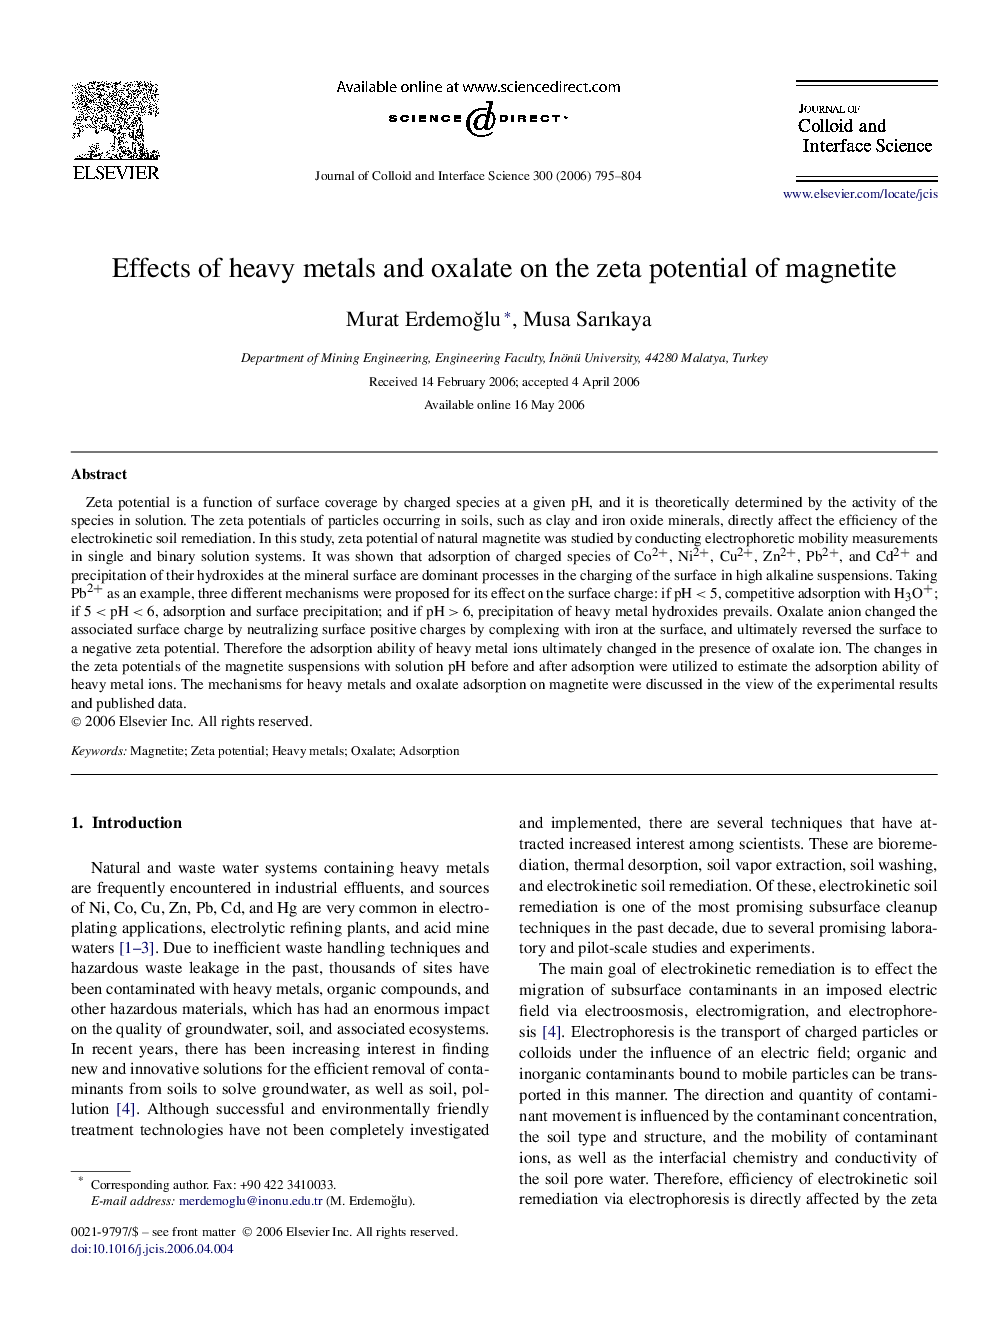 Effects of heavy metals and oxalate on the zeta potential of magnetite